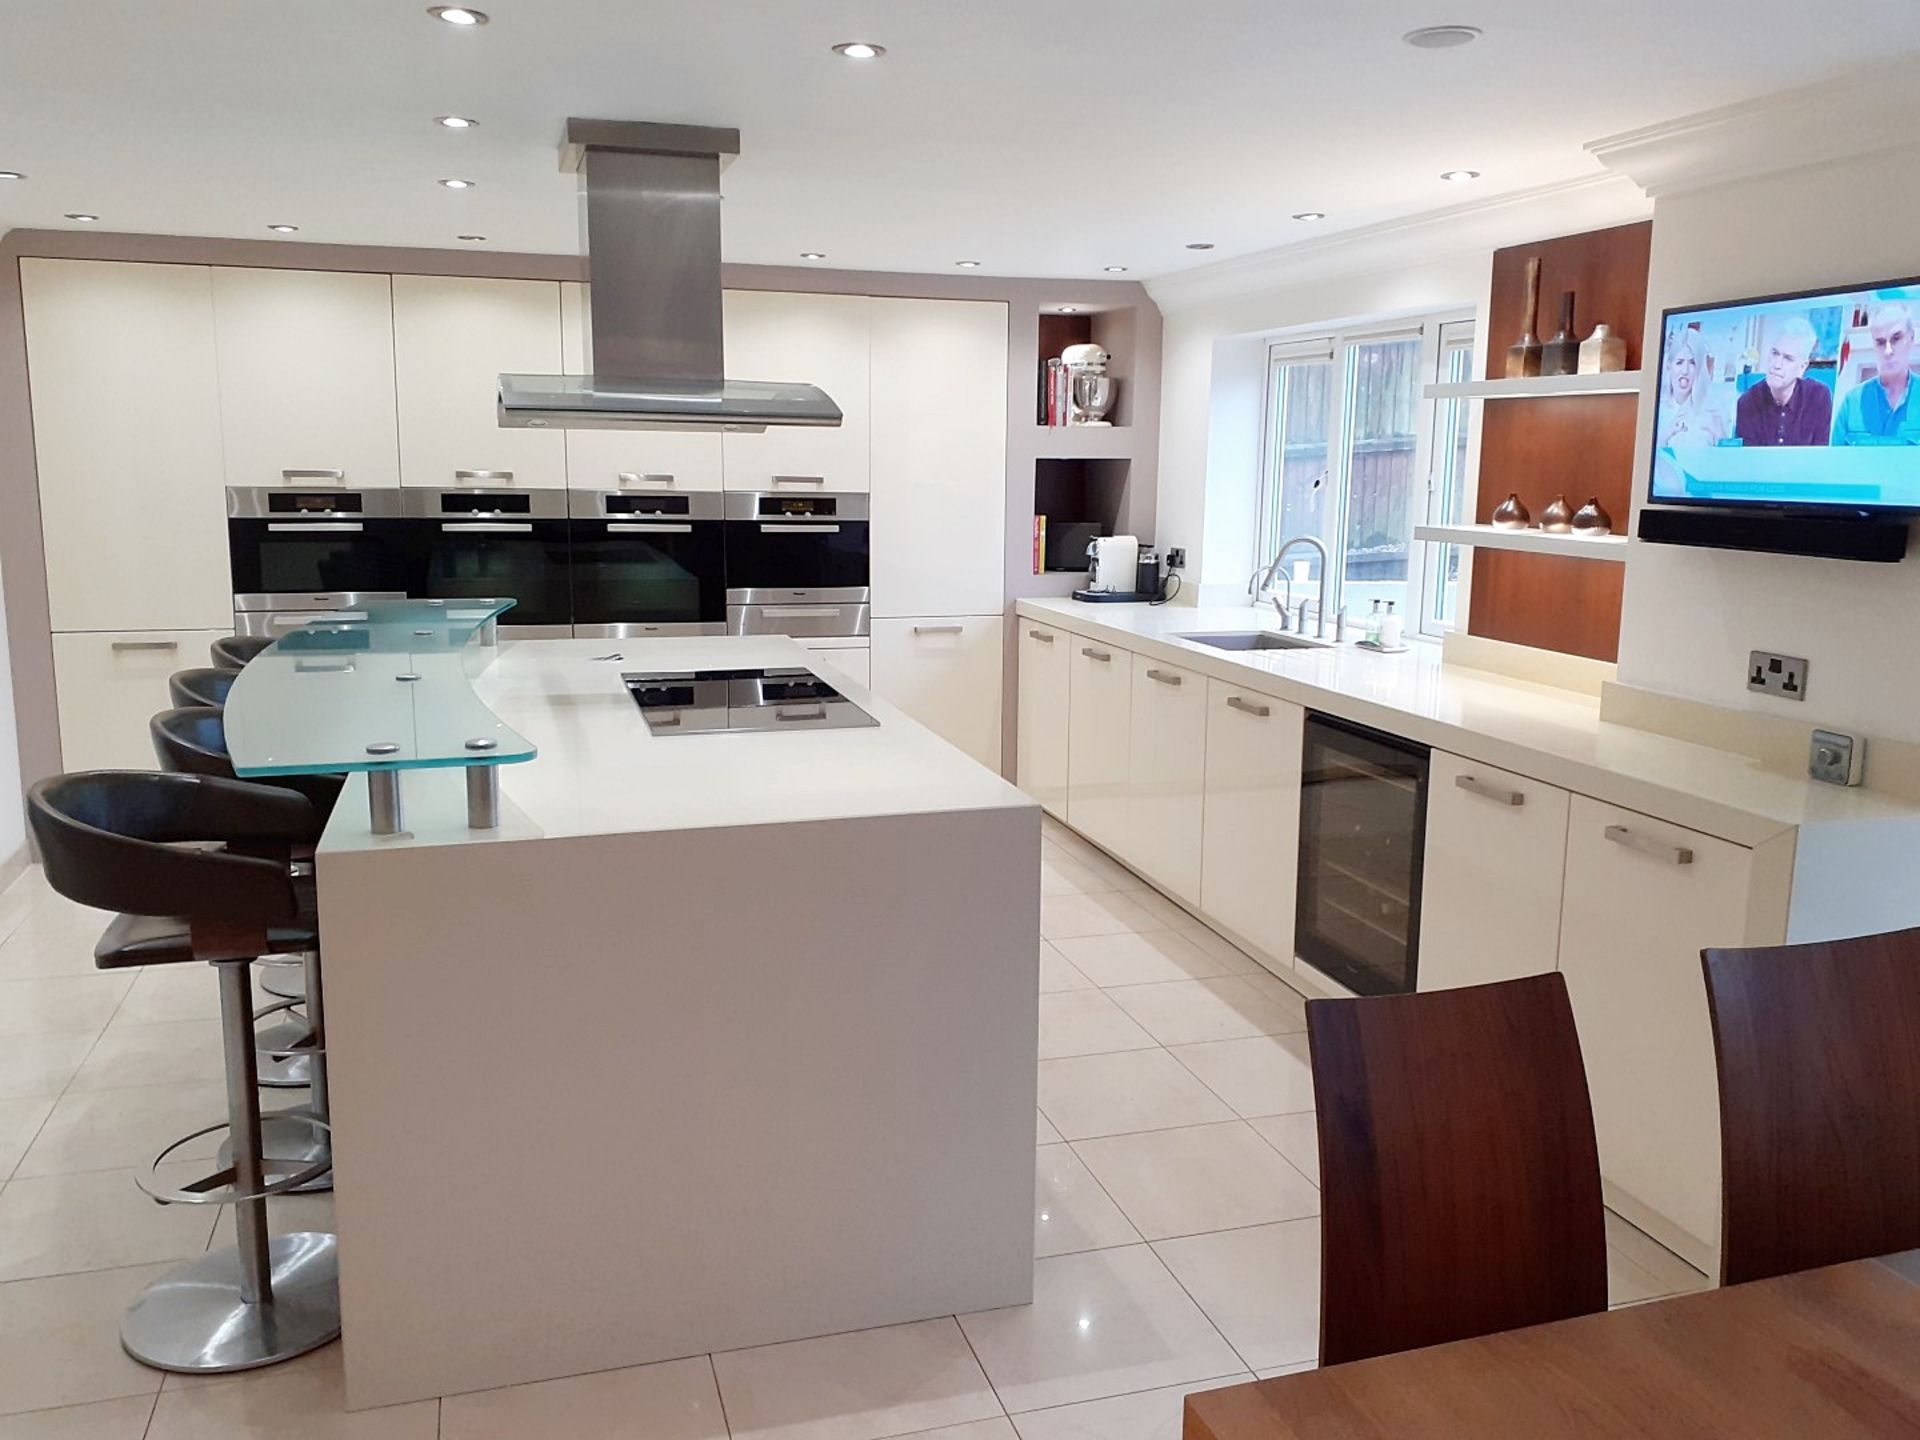 1 x ALNO Fitted Kitchen With Integrated Miele Appliances, Silestone Worktops & Breakfast Island